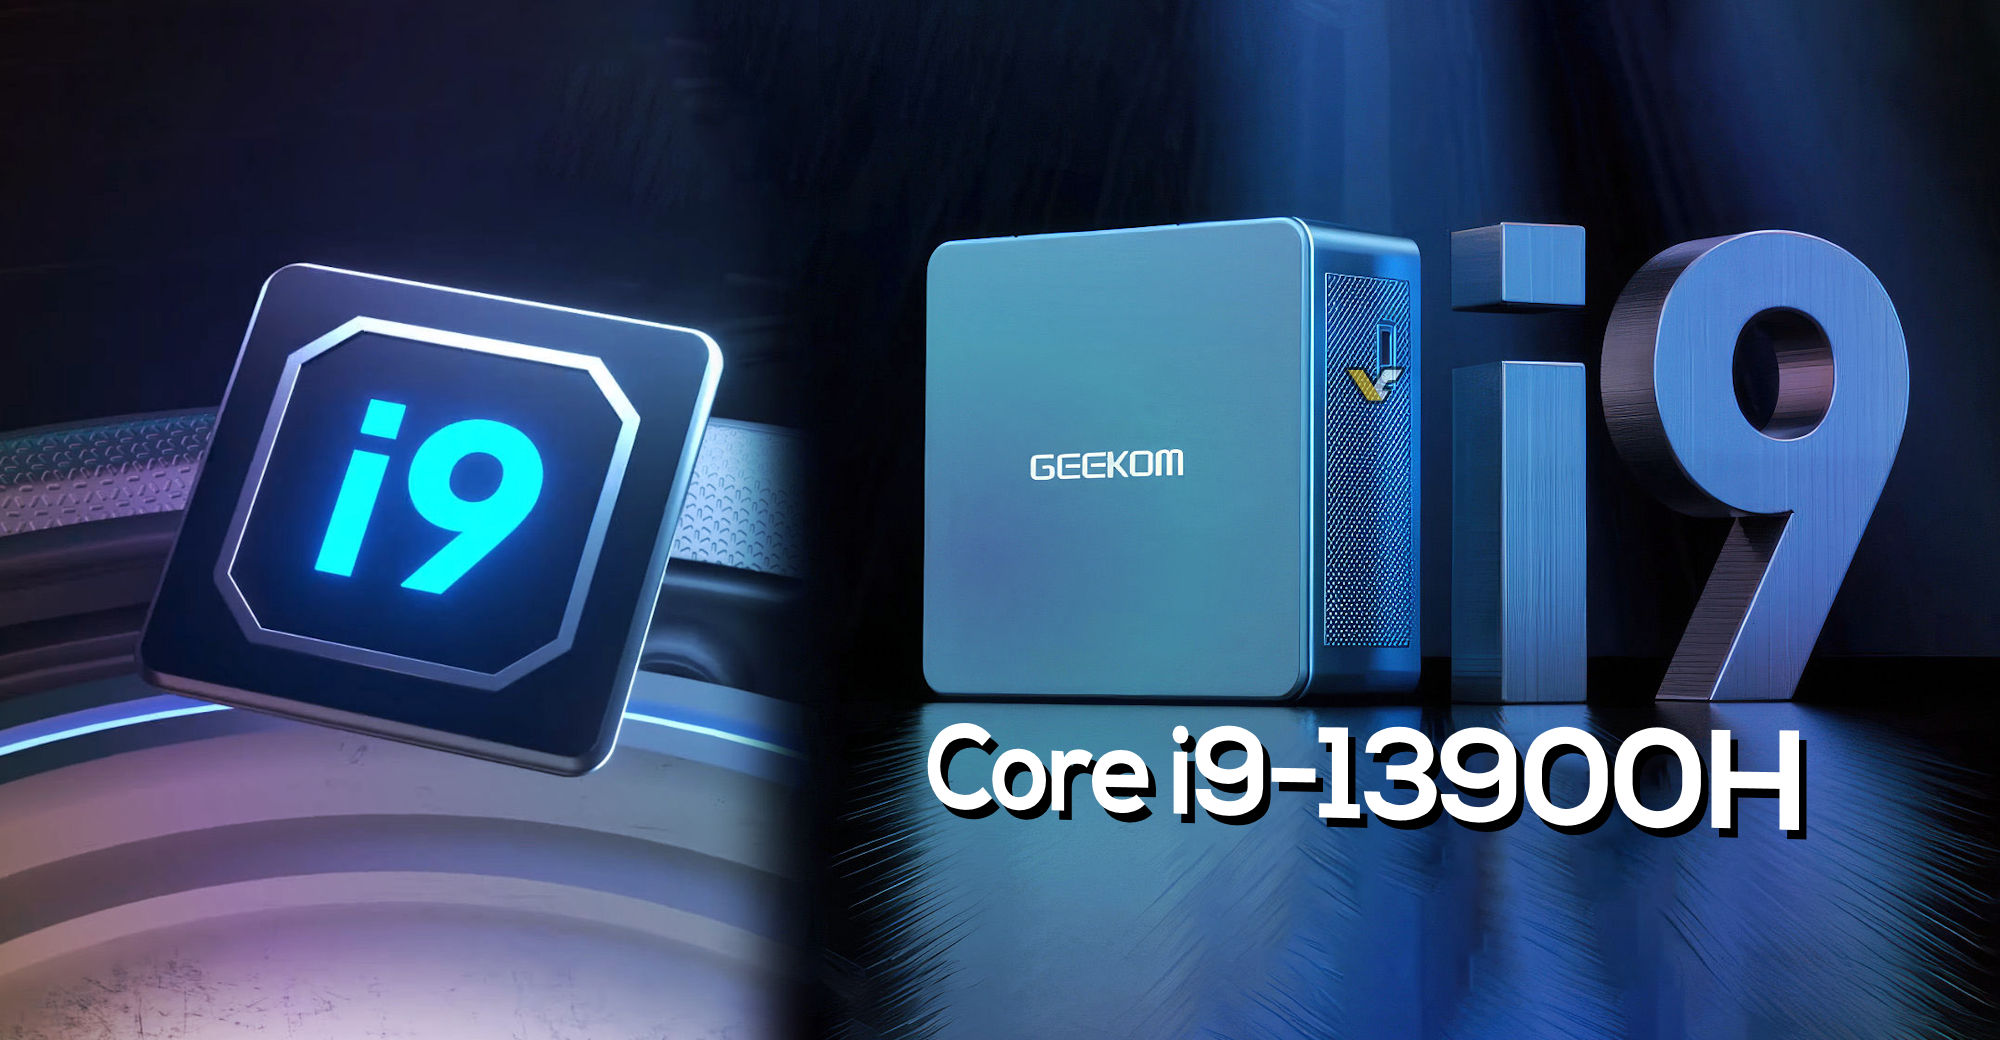 Geekom announces world's first 4x4 Mini-PC with Intel Core i9 CPU, up to 14-core  i9-13900H on board 